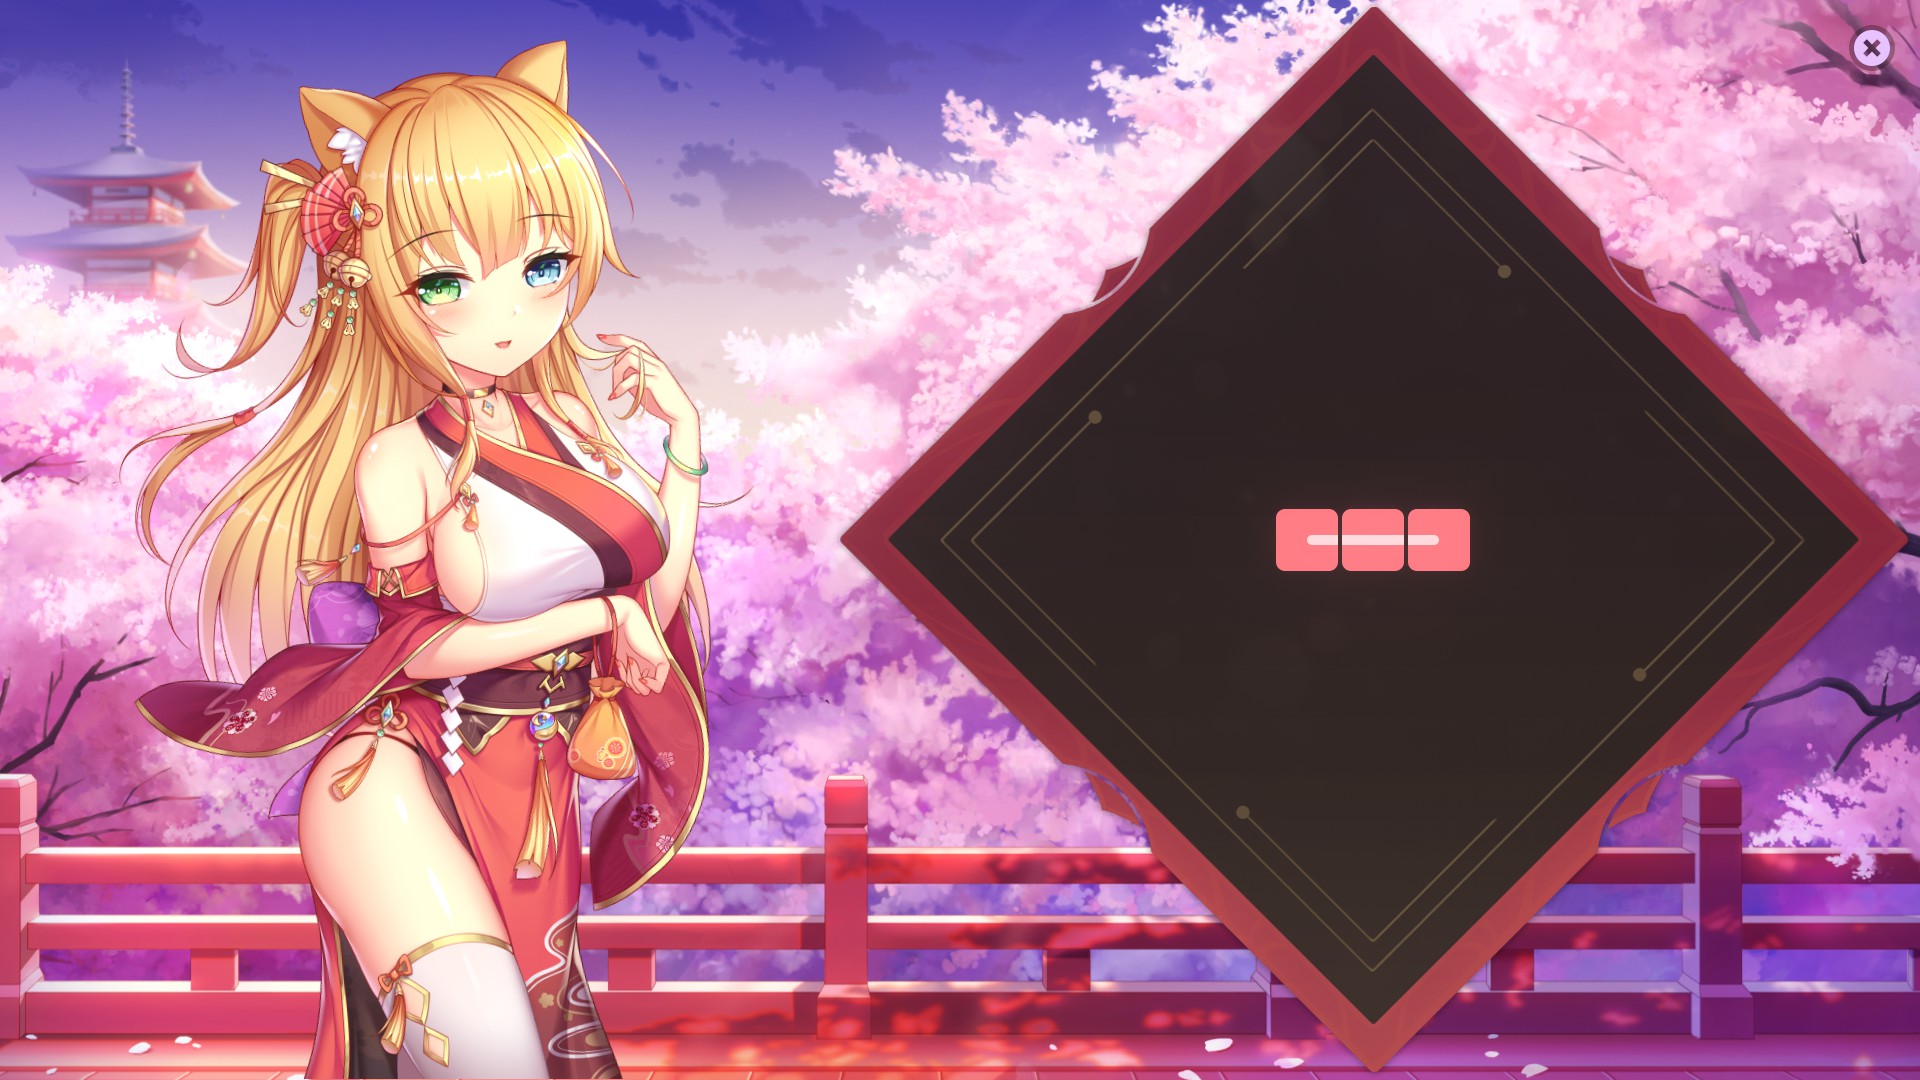 Sakura Hime 2 Achievement Guide - Images of completed levels - 3623DE1